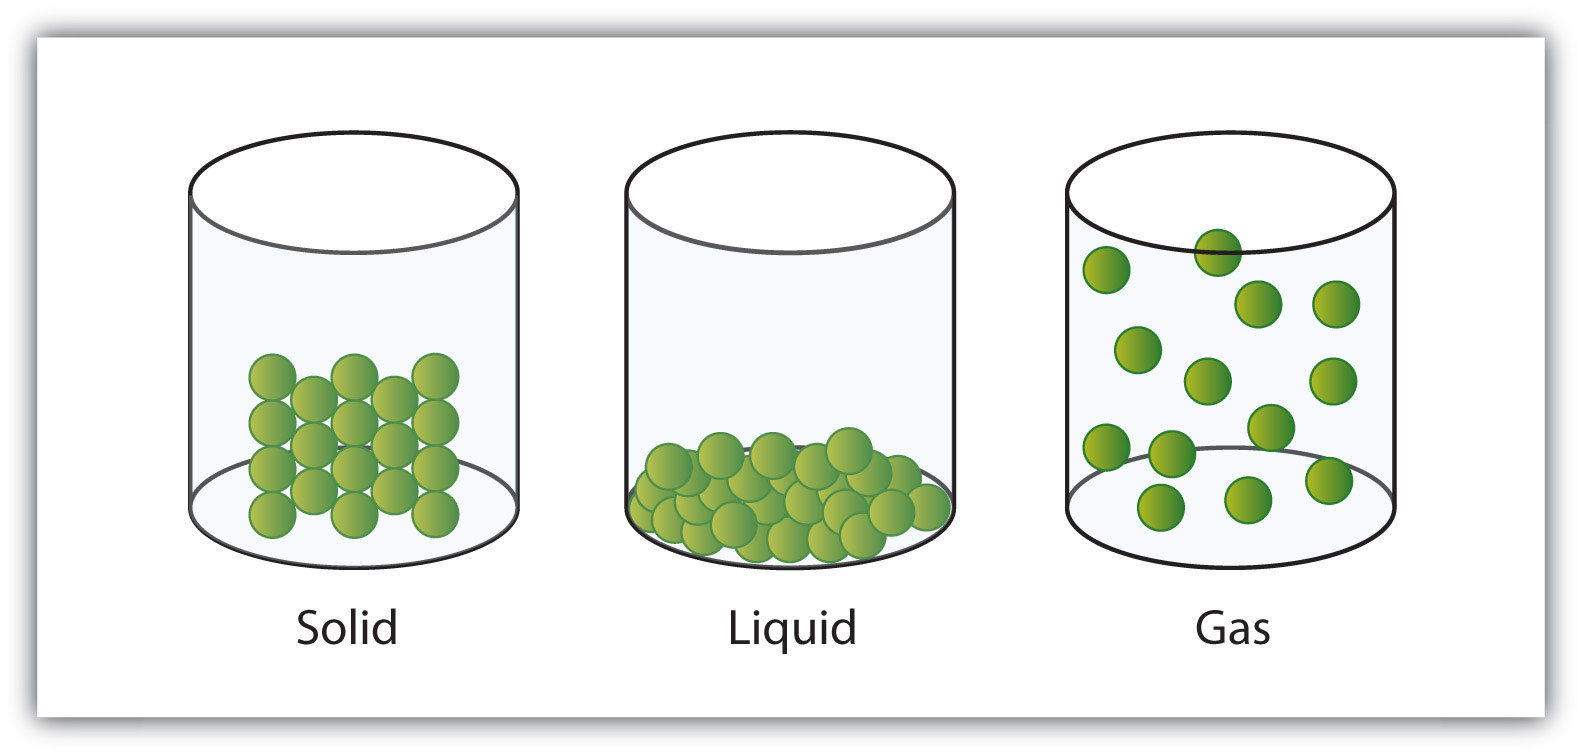 Why do solids maintain a definite shape and volume?